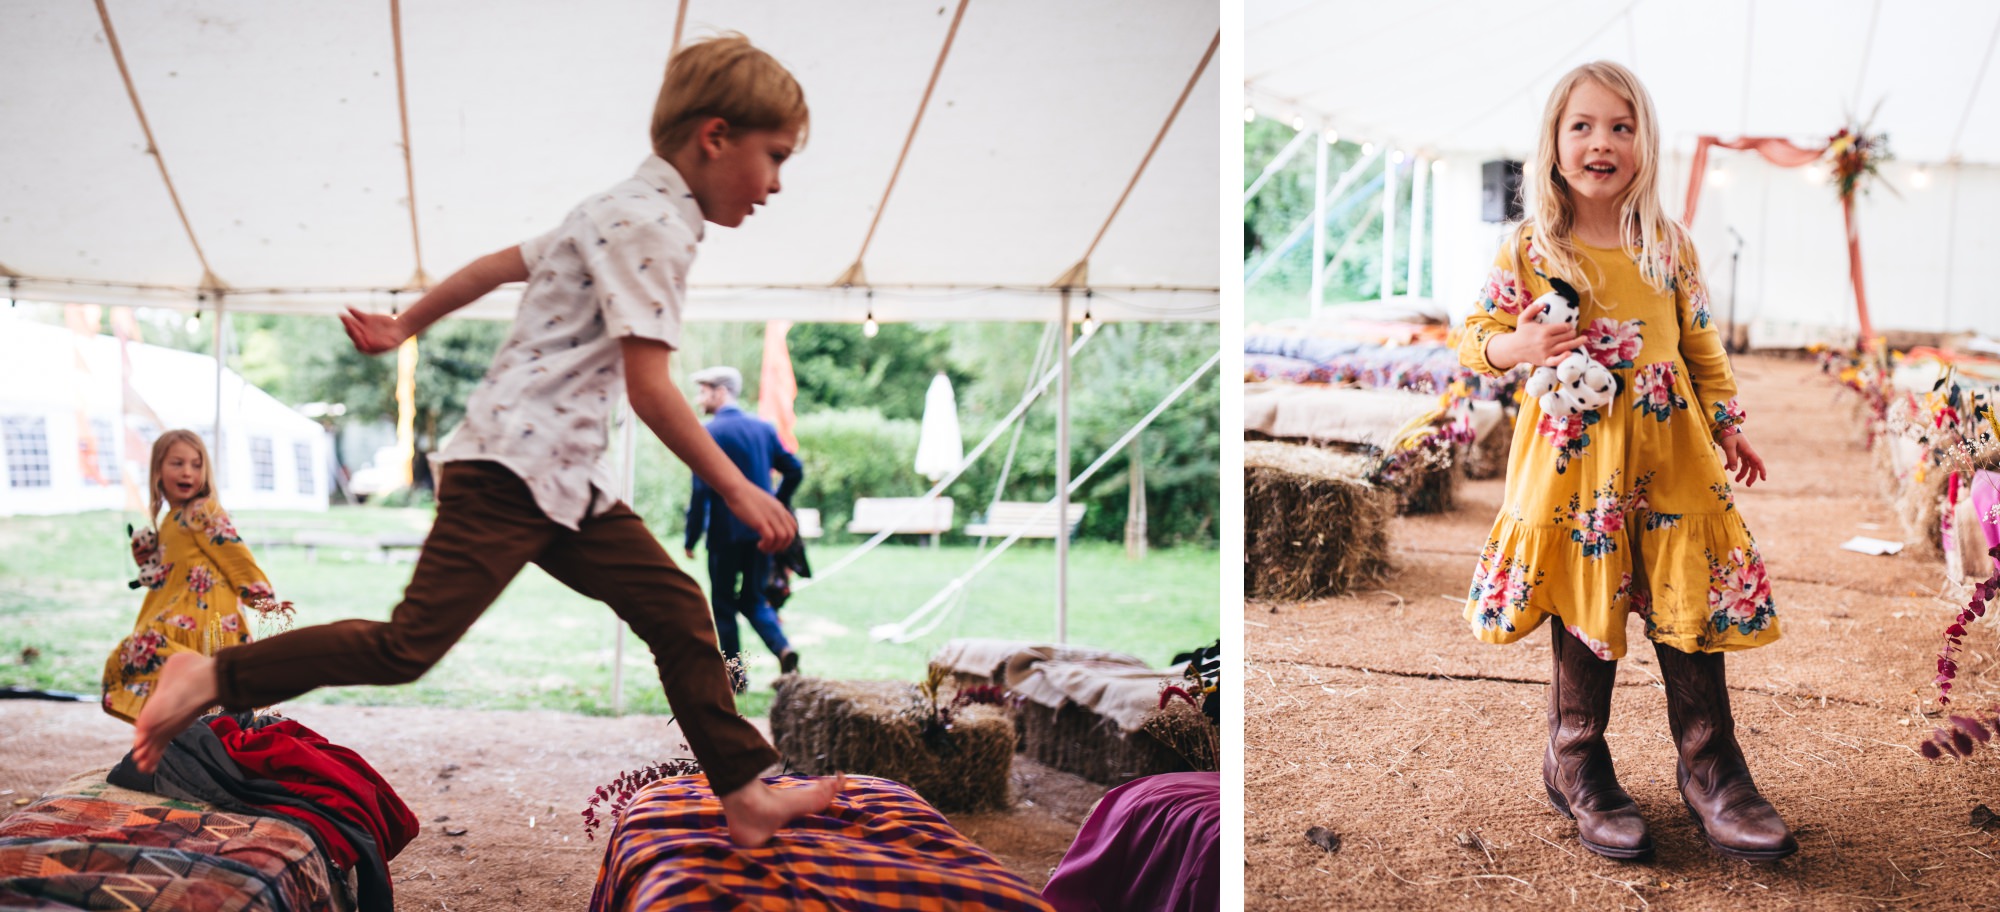 children playing around hay bales in marquee tent